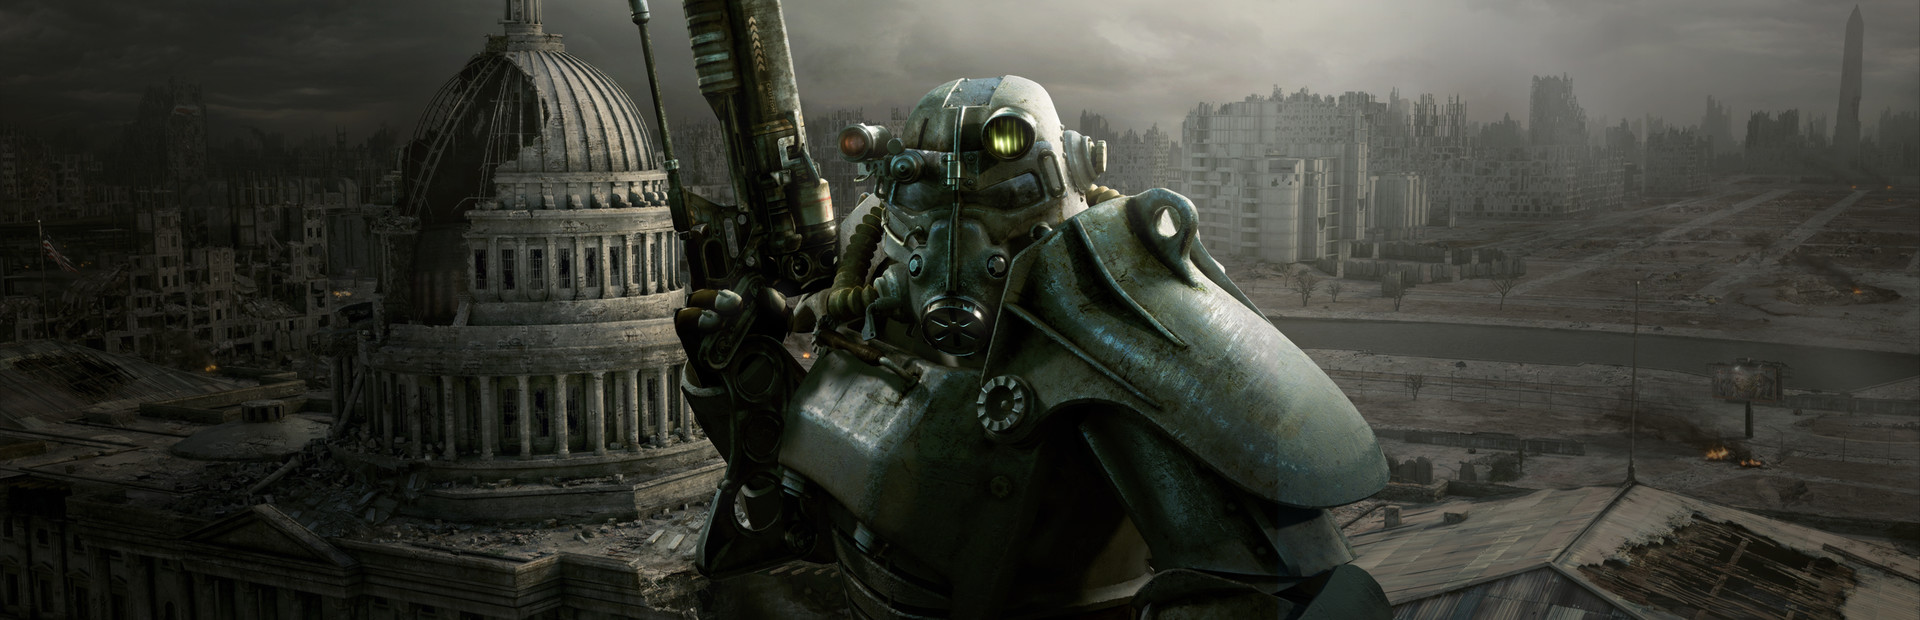 Fallout 3 cover image